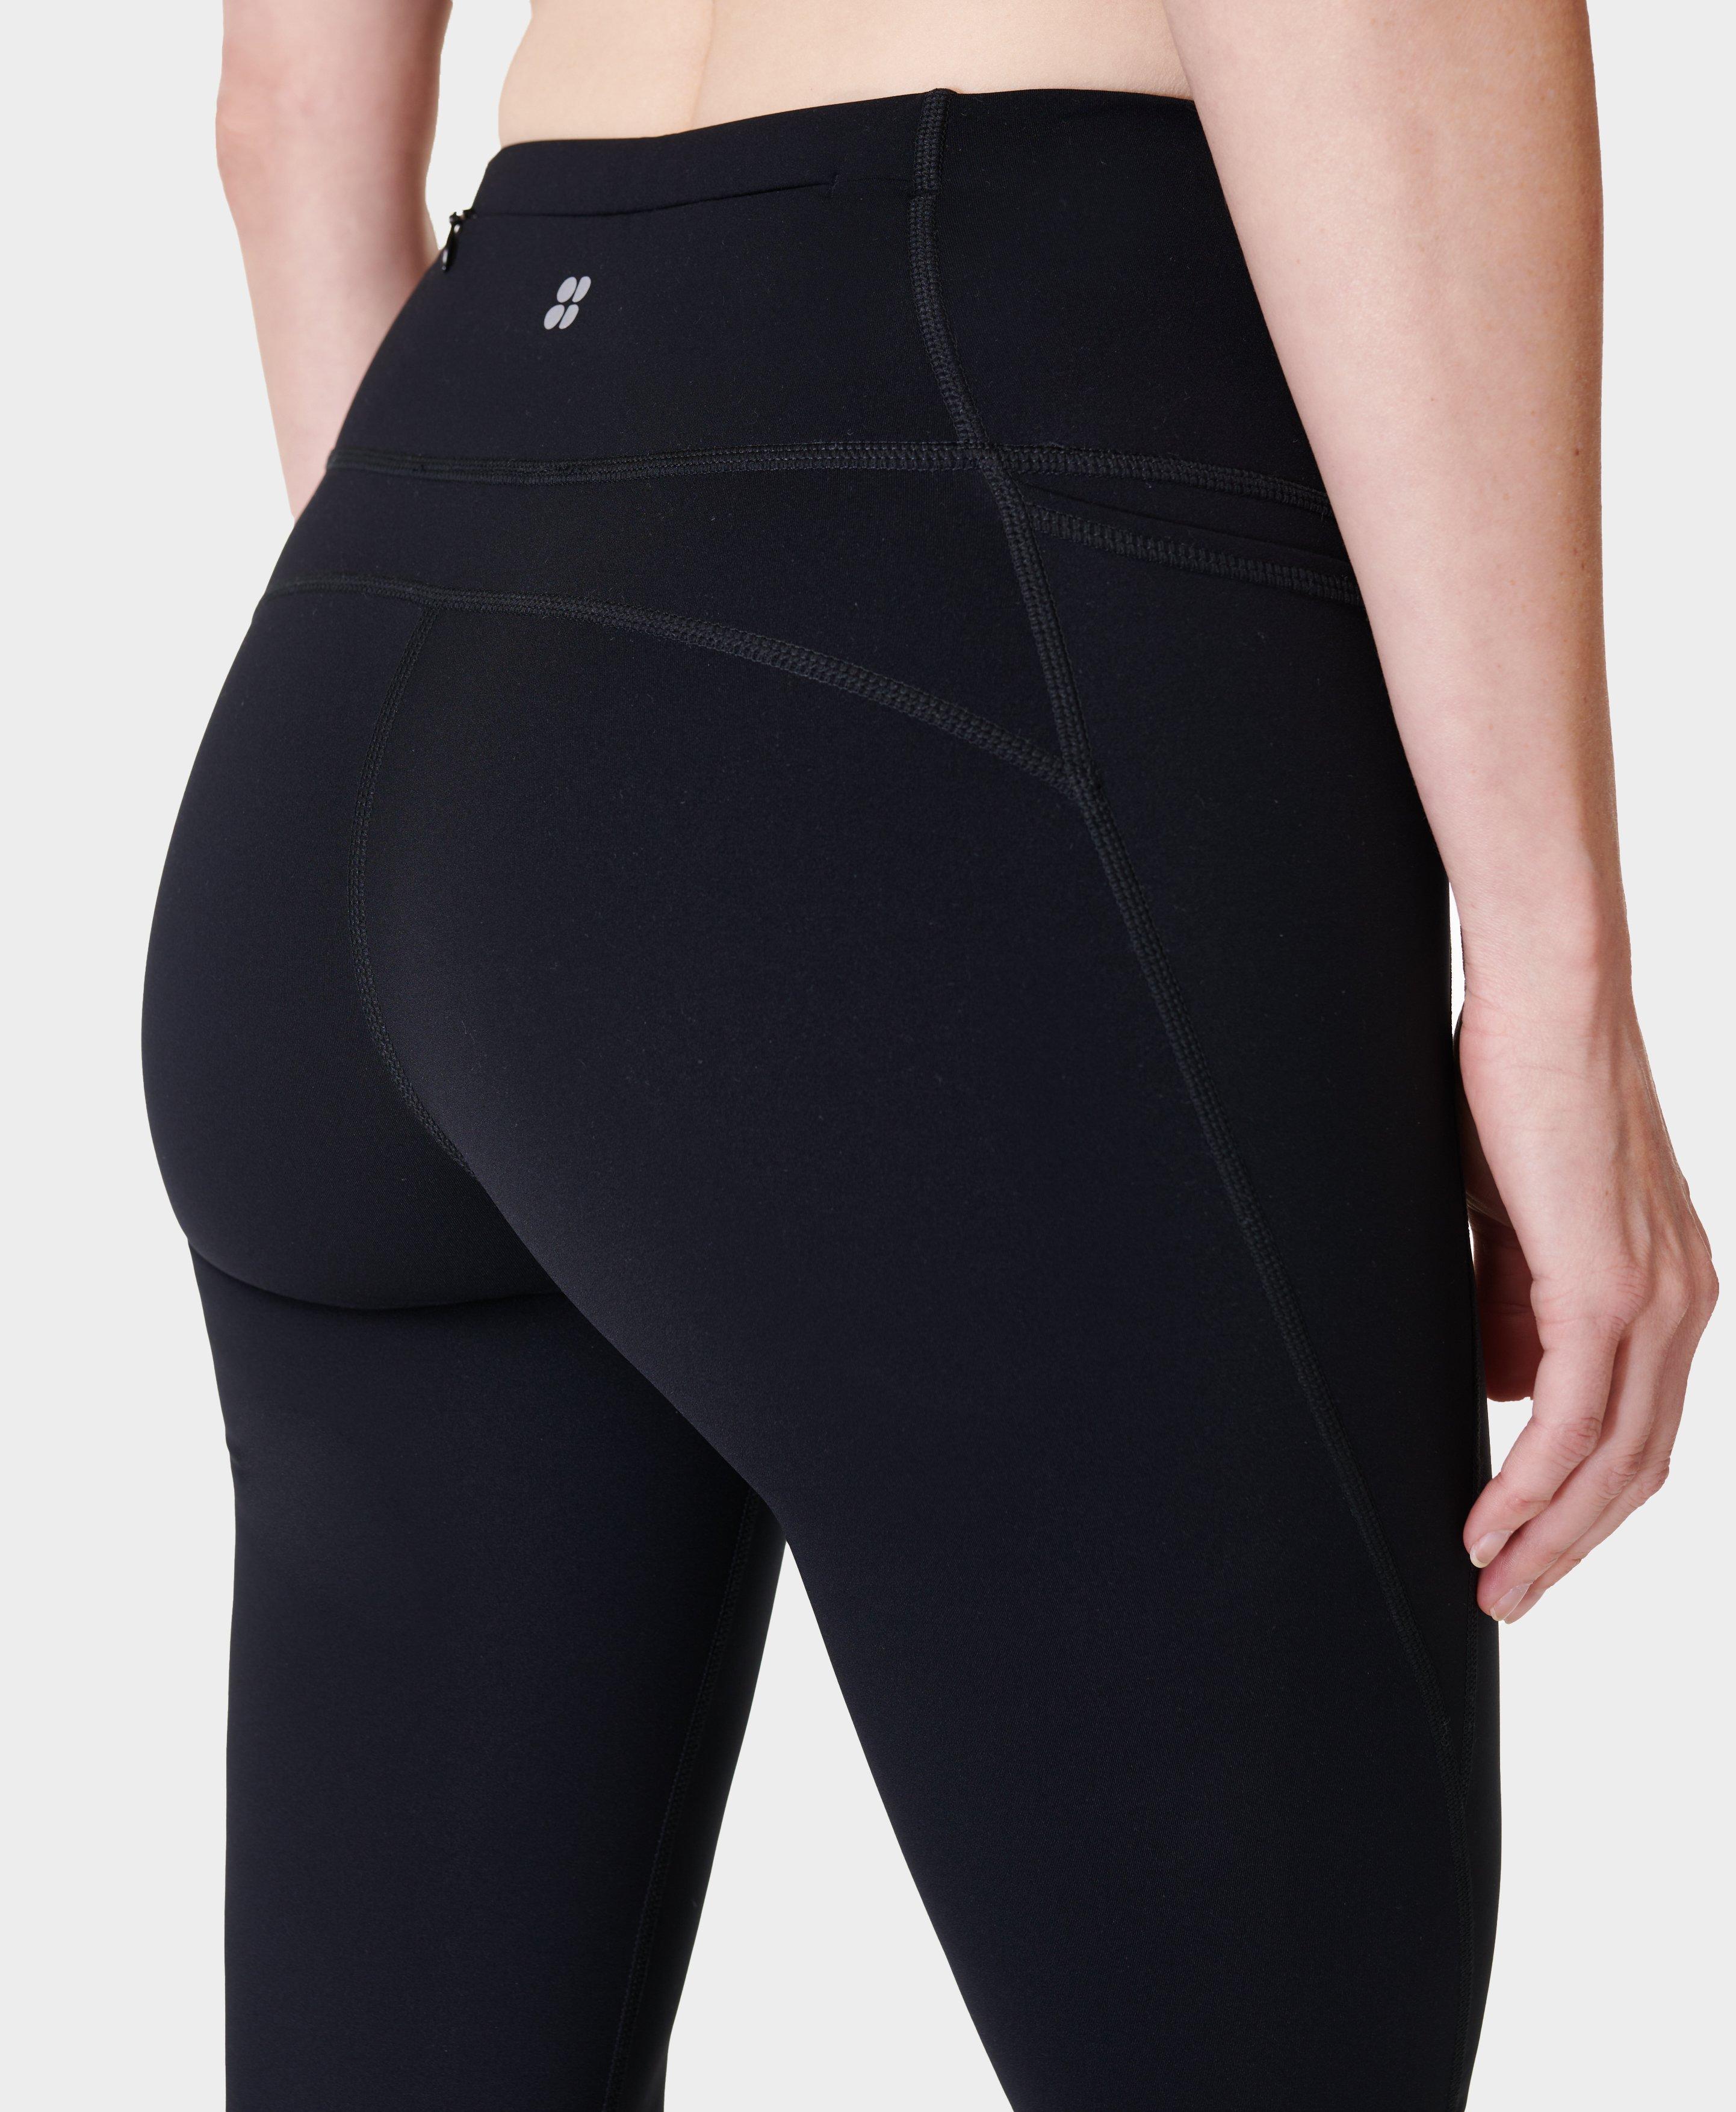 Bootcut Yoga Pants With Back Pockets